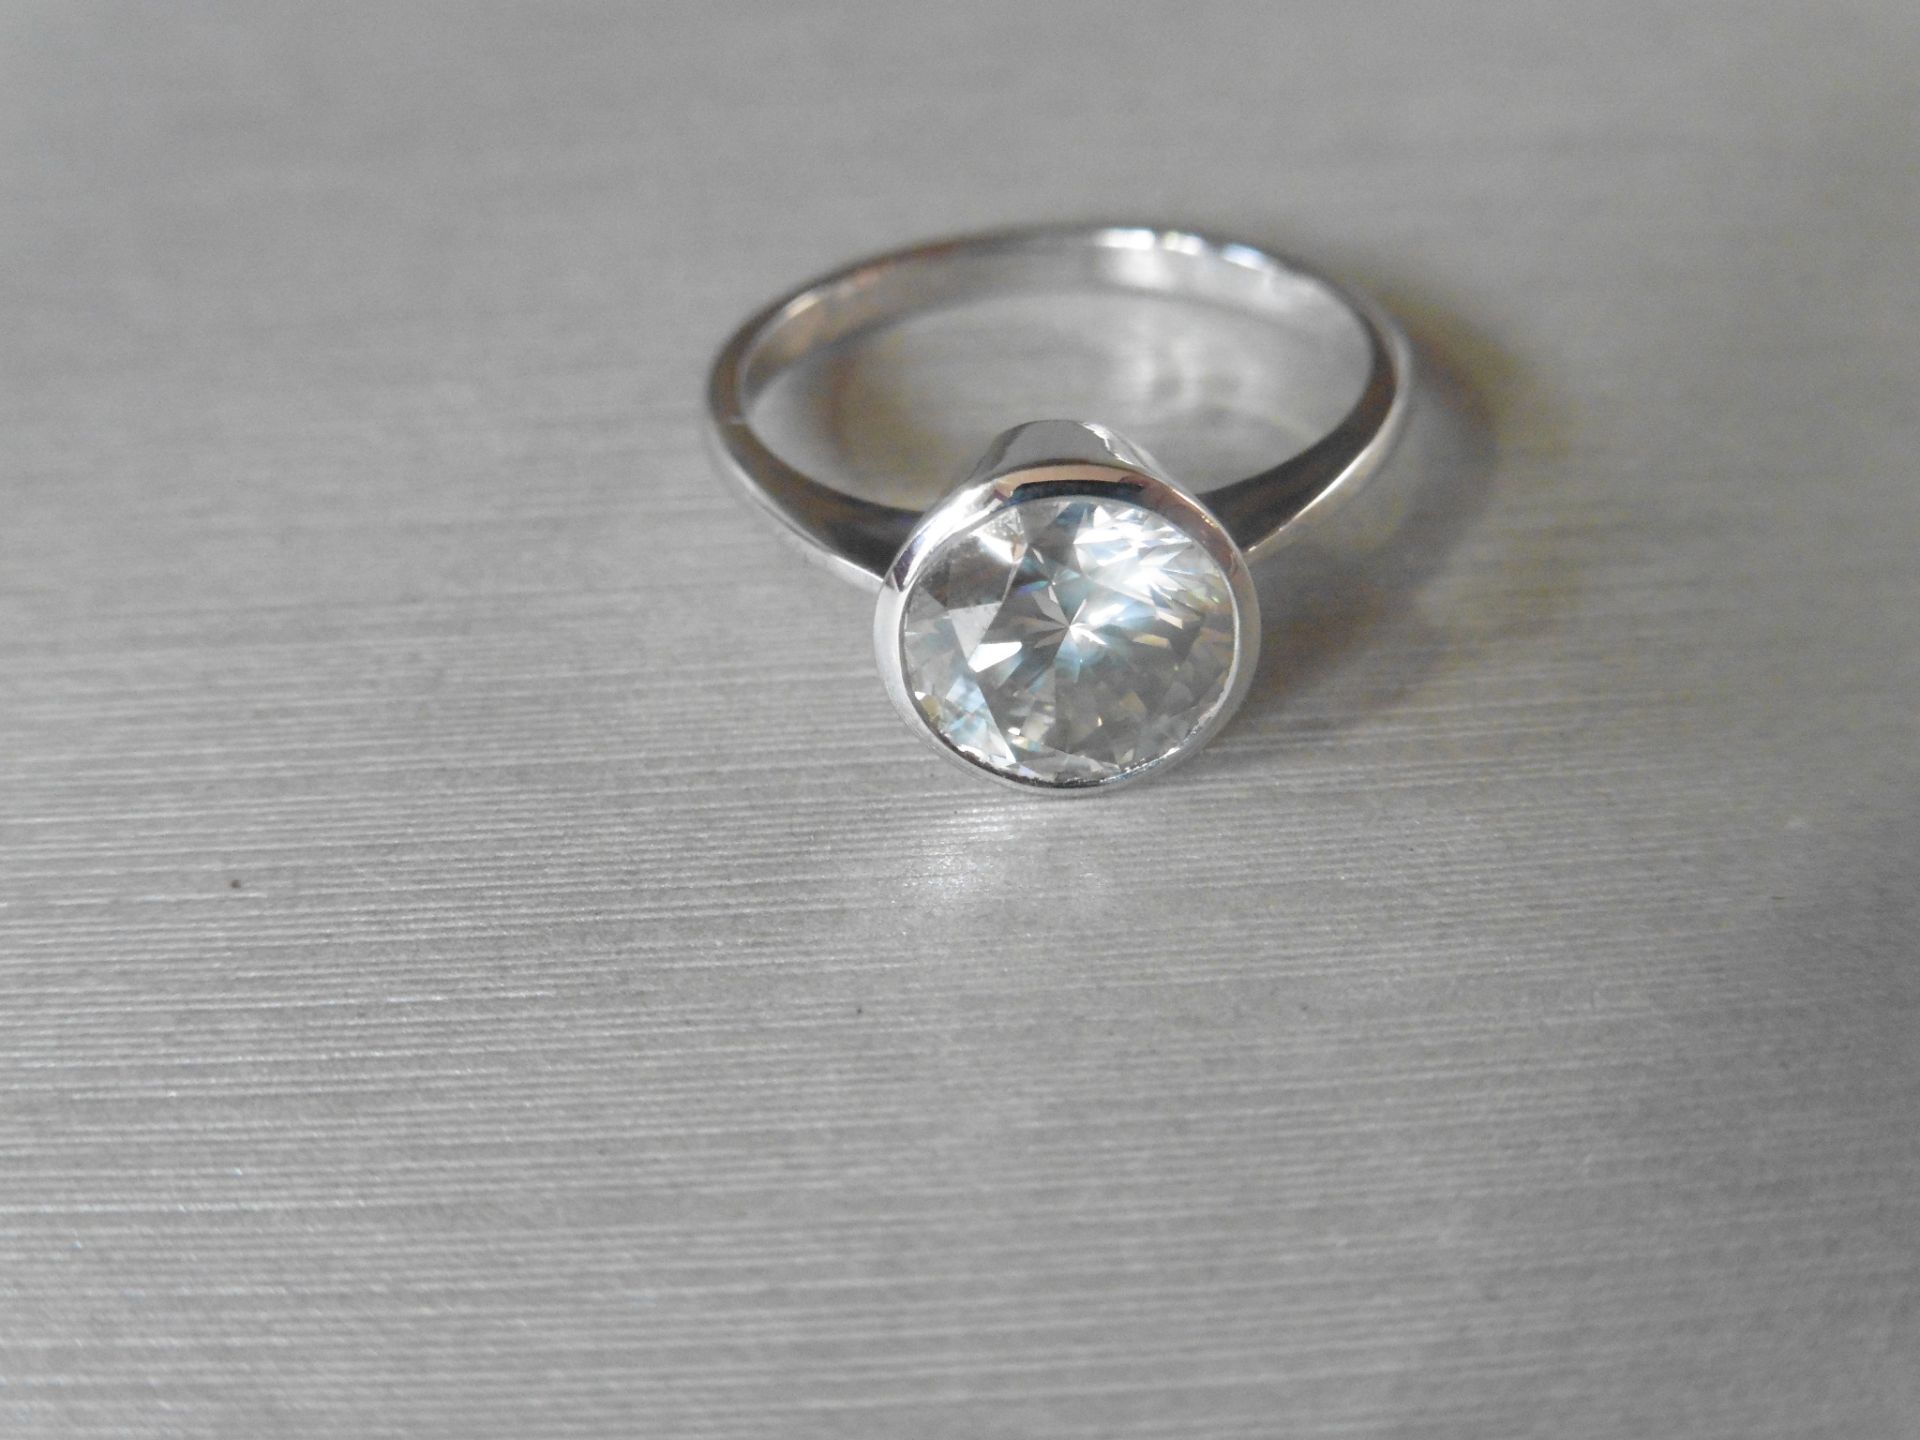 2.36ct brilliant cut diamond solitaire ring set in 18ct white gold rub over setting. K colour, Si2 - Image 4 of 4